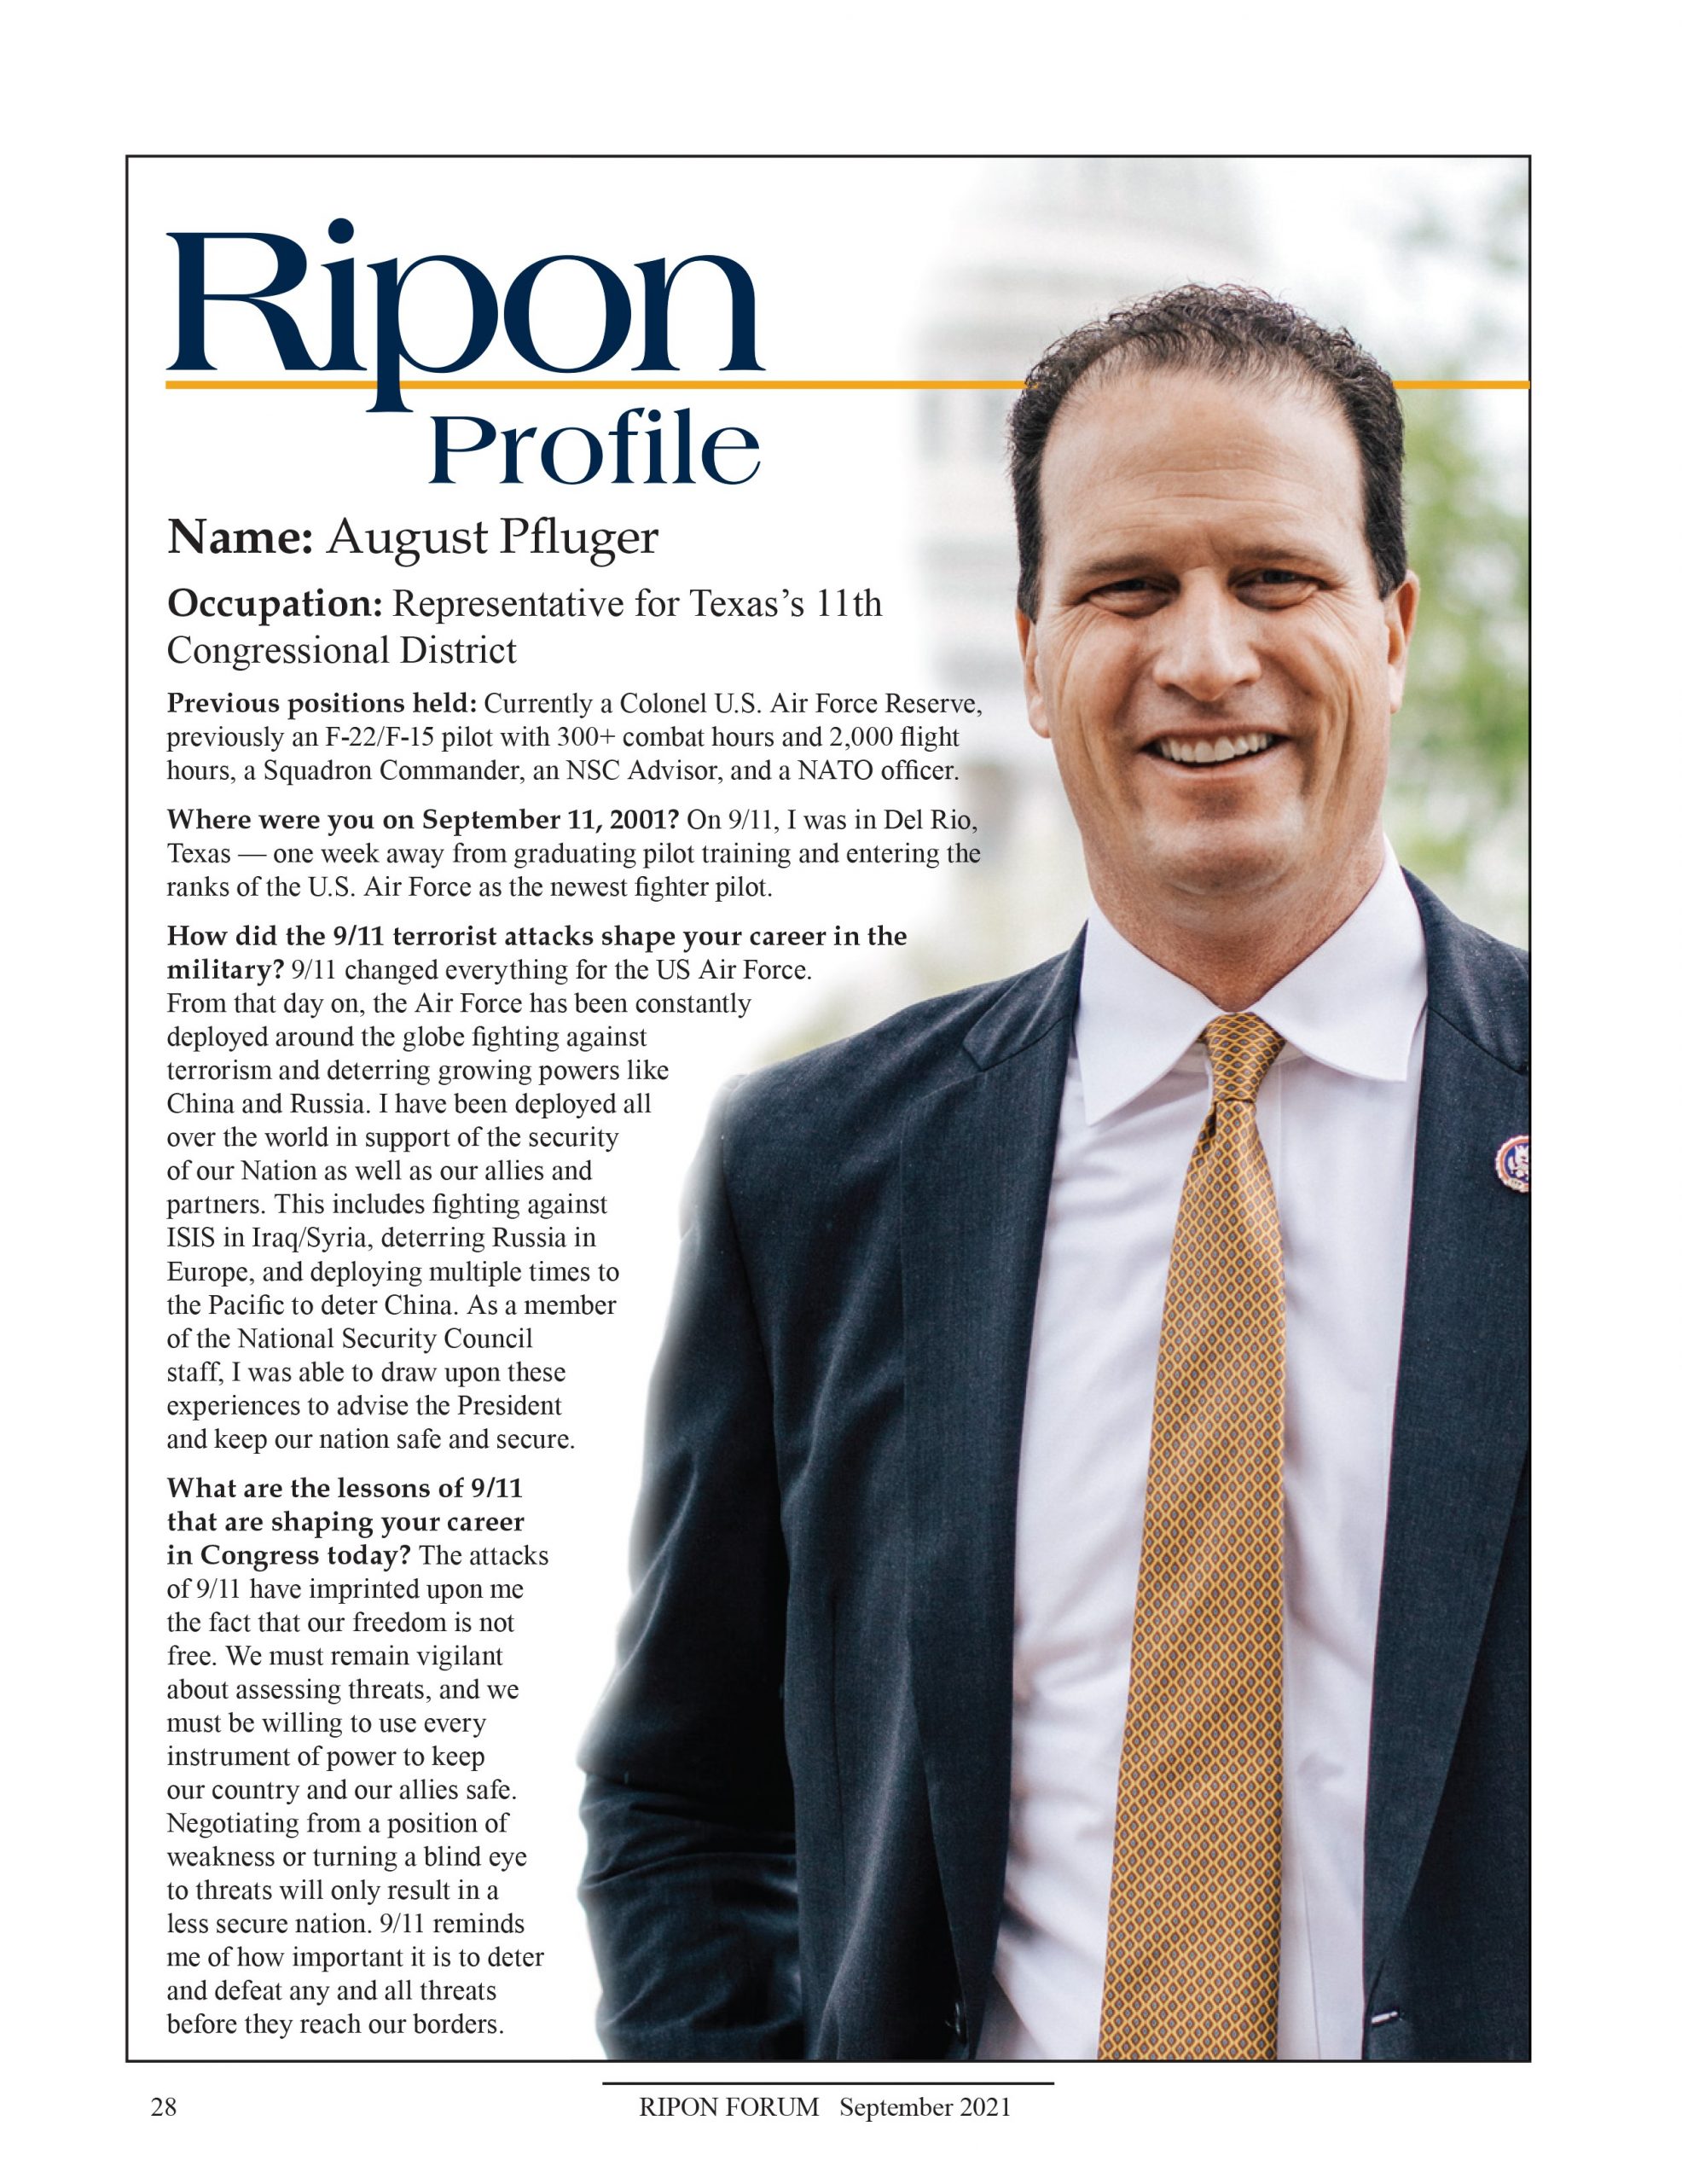 Ripon Profile of August Pfluger - The Ripon Society : The Ripon